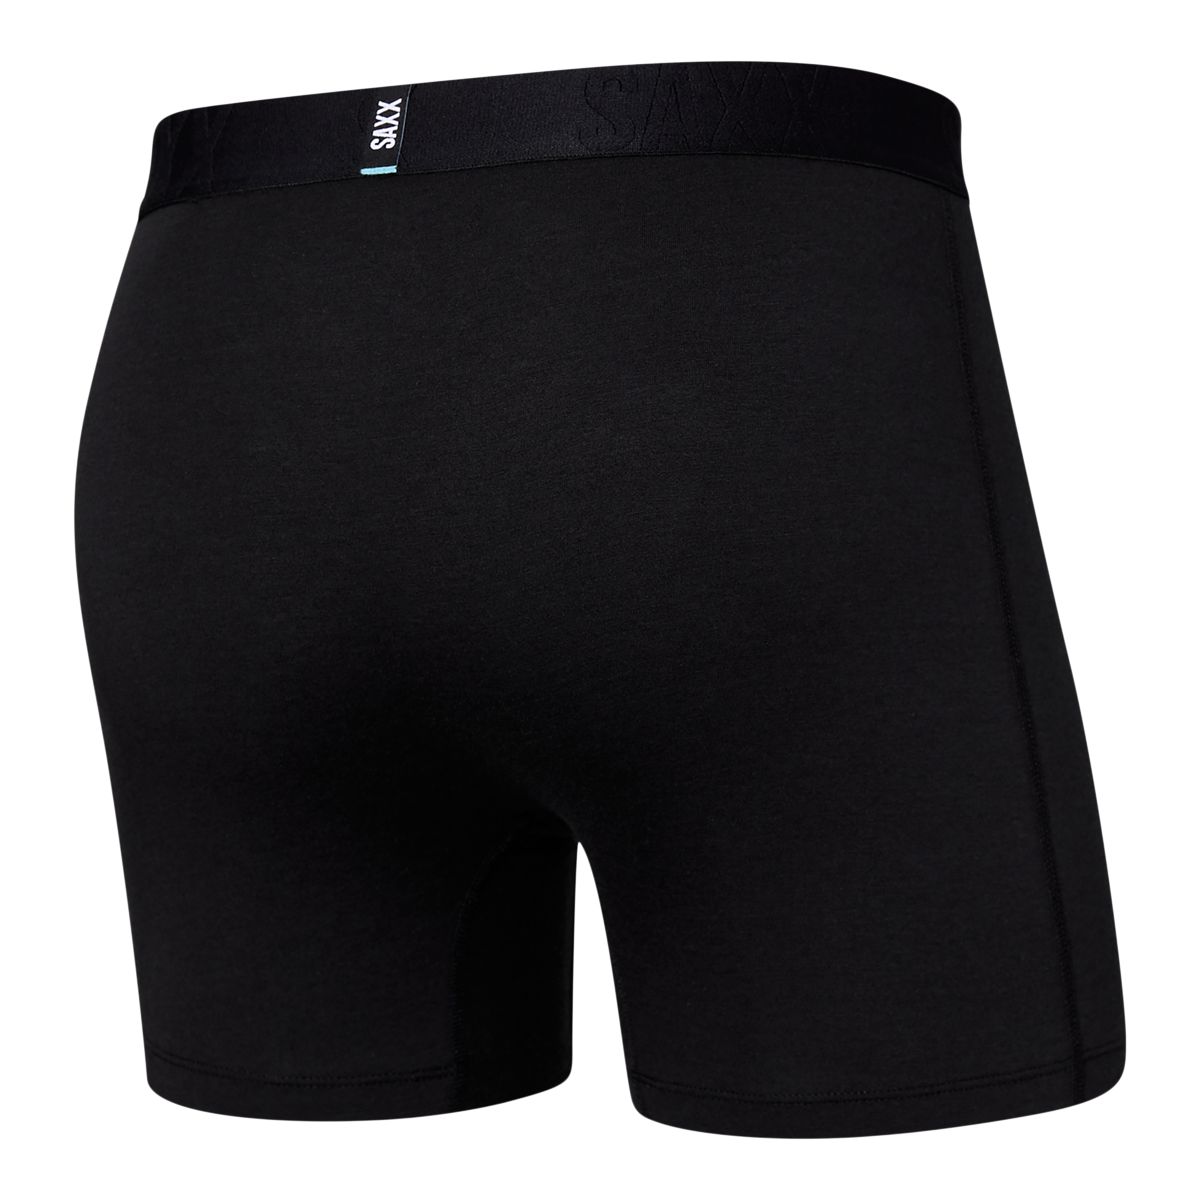 https://media-www.sportchek.ca/product/div-03-softgoods/dpt-79-clothing-accessories/sdpt-01-mens/333907368/saxx-droptemp-cotton-boxer-brief-722-blk-5c04bd3a-d444-4ed9-a653-762028309486-jpgrendition.jpg?imdensity=1&imwidth=1244&impolicy=mZoom